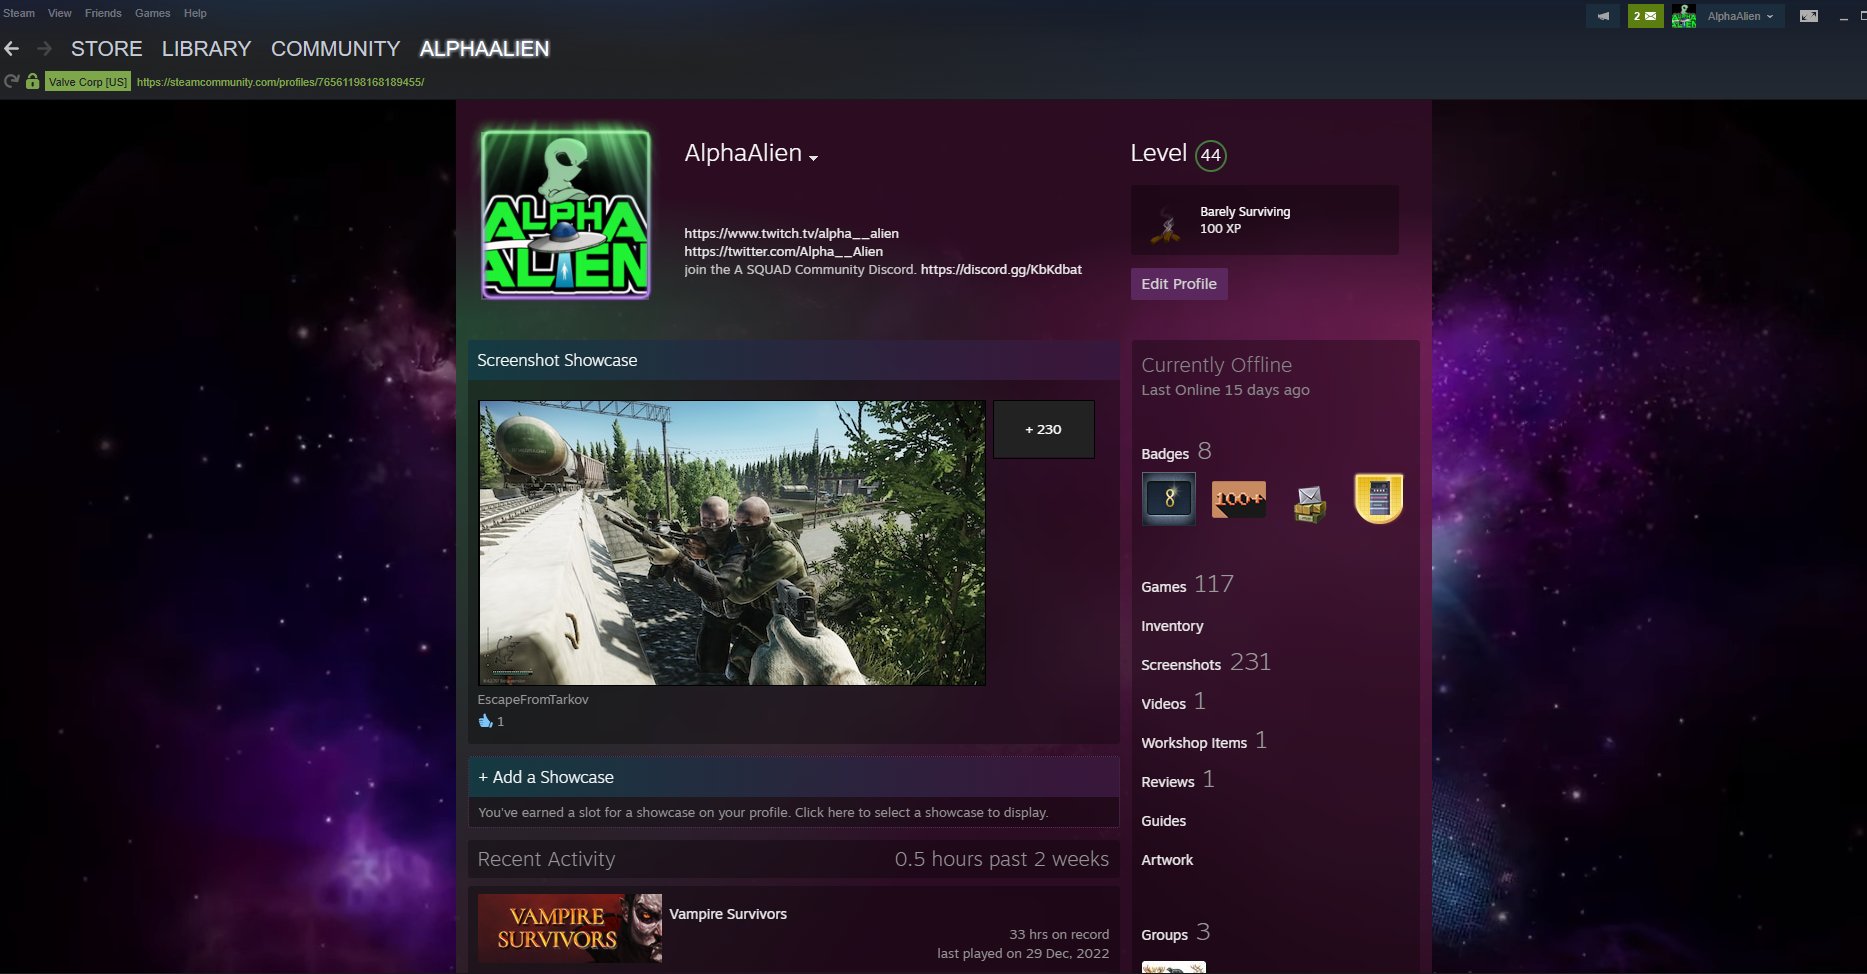 My steam profile artwork, add me if you feel like it ! trying to